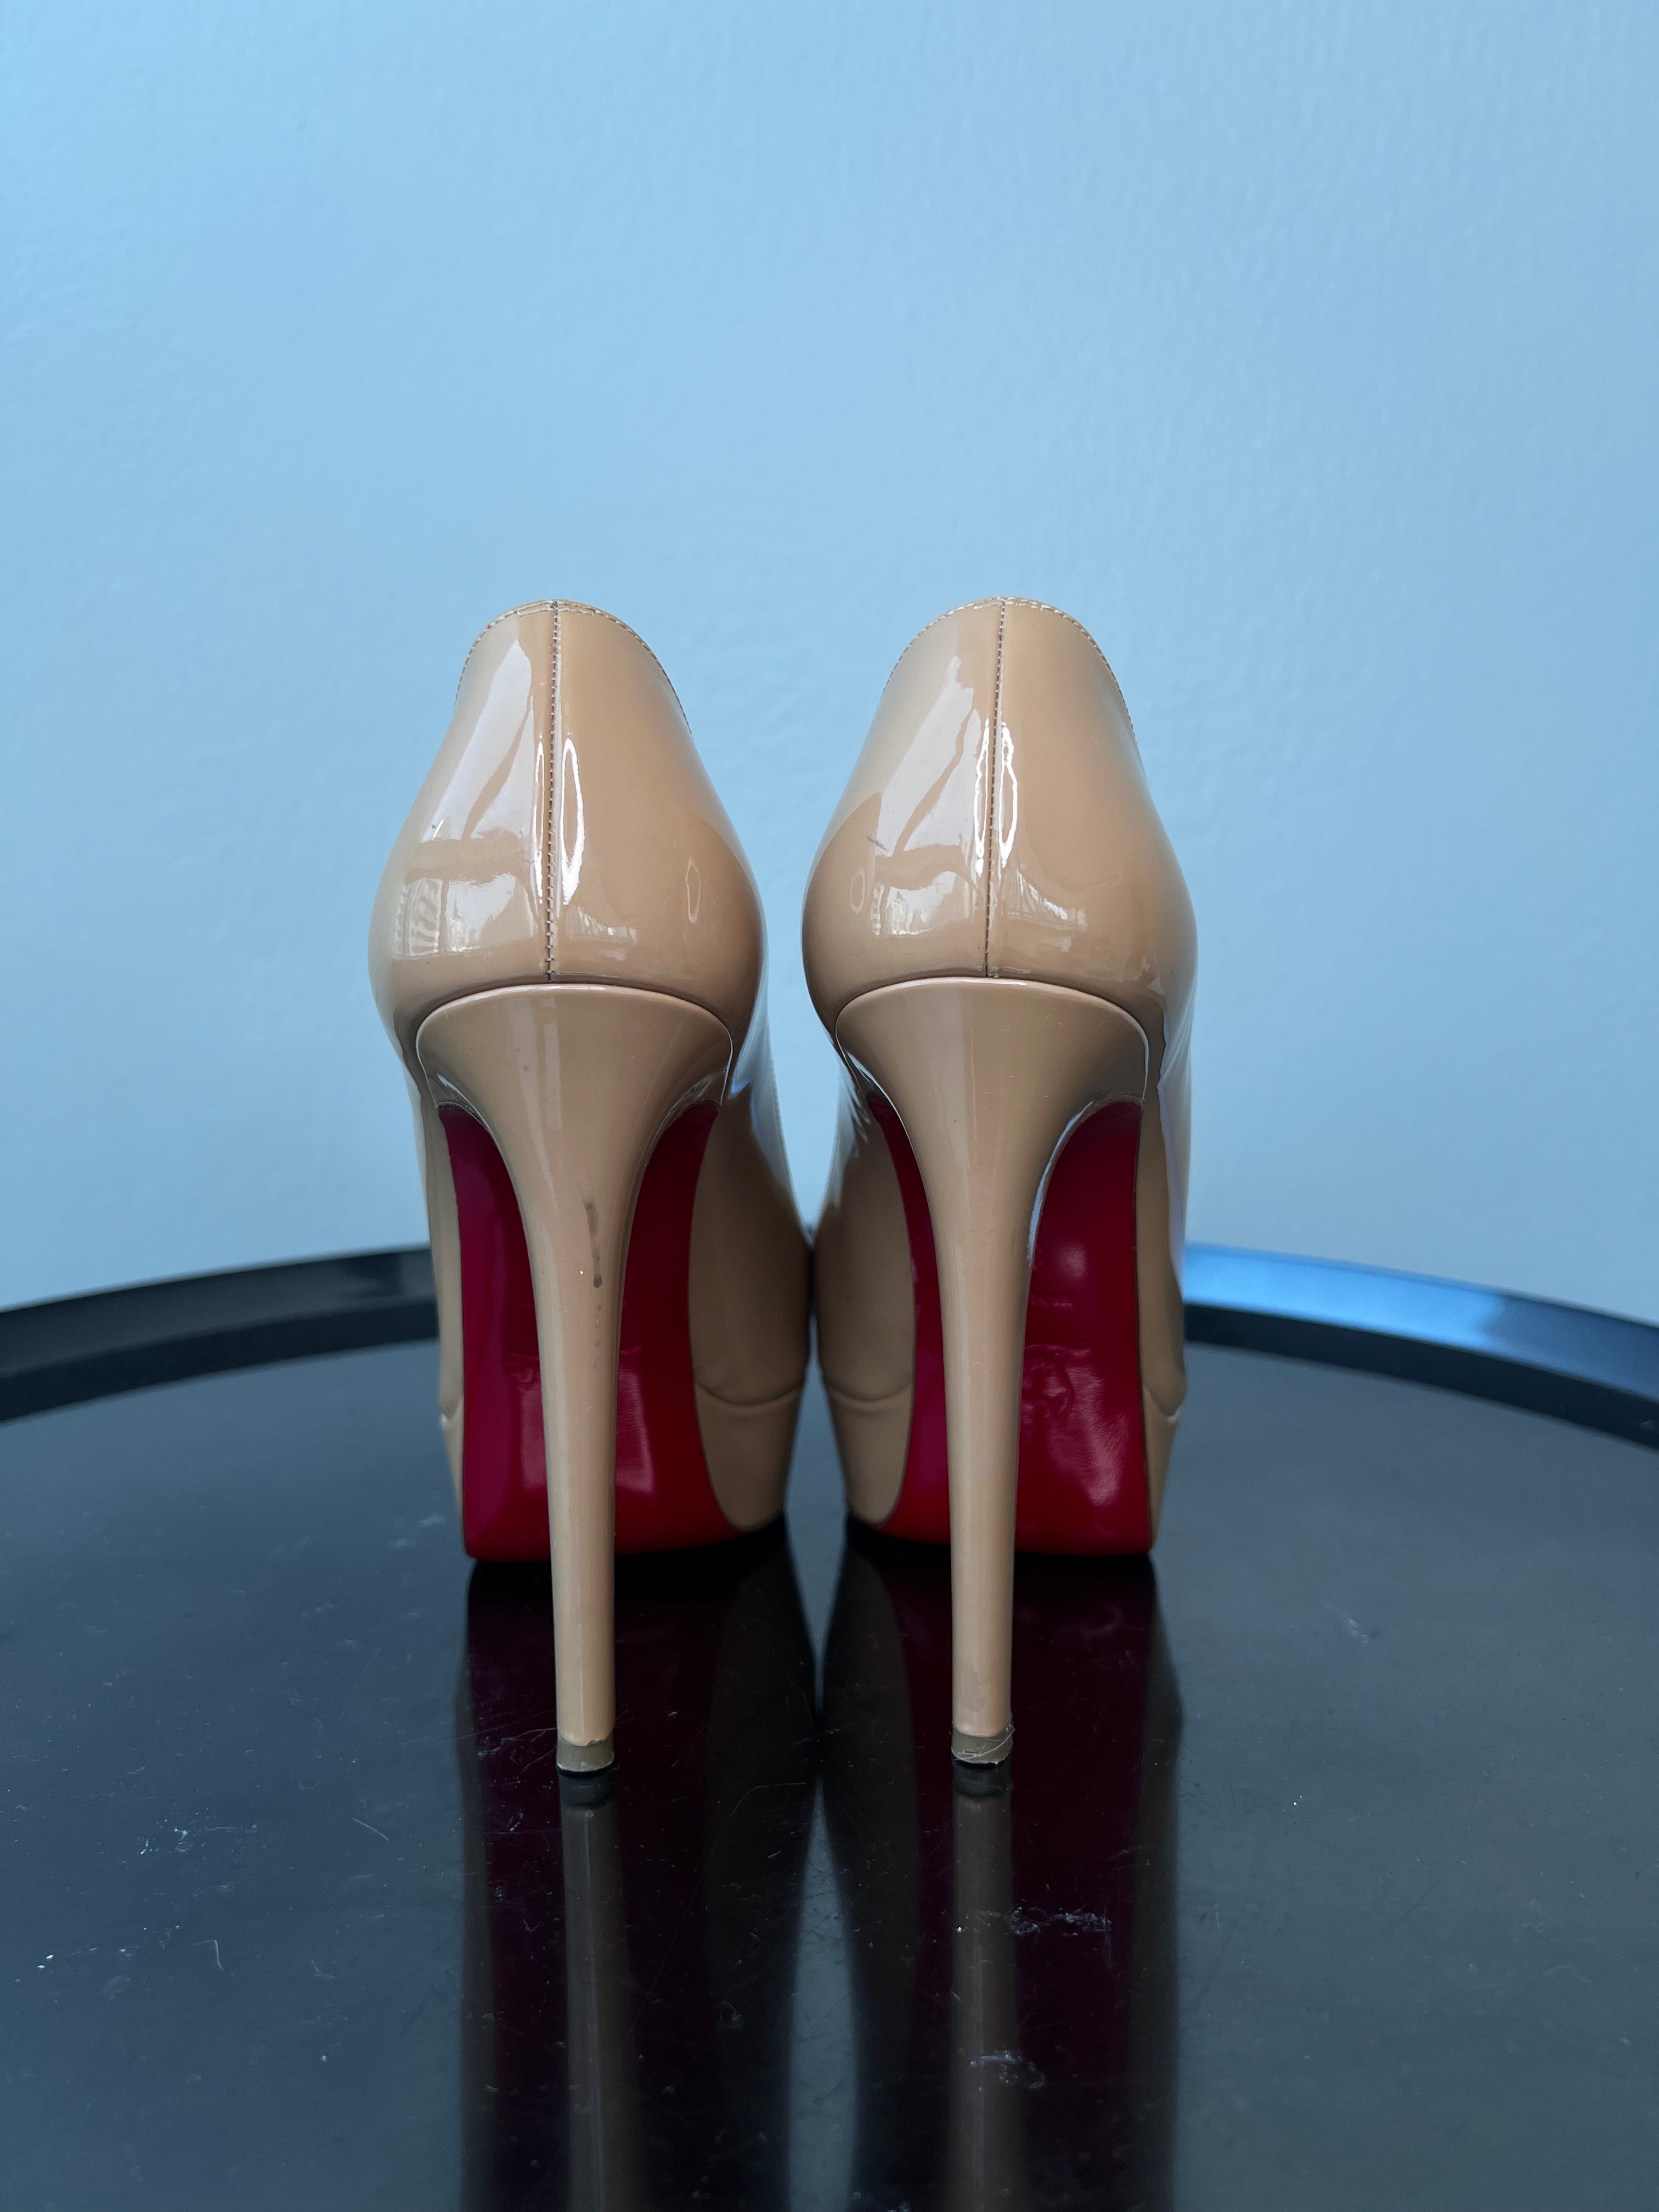 Christian Louboutin Women's Pumps and Classics Heels for sale